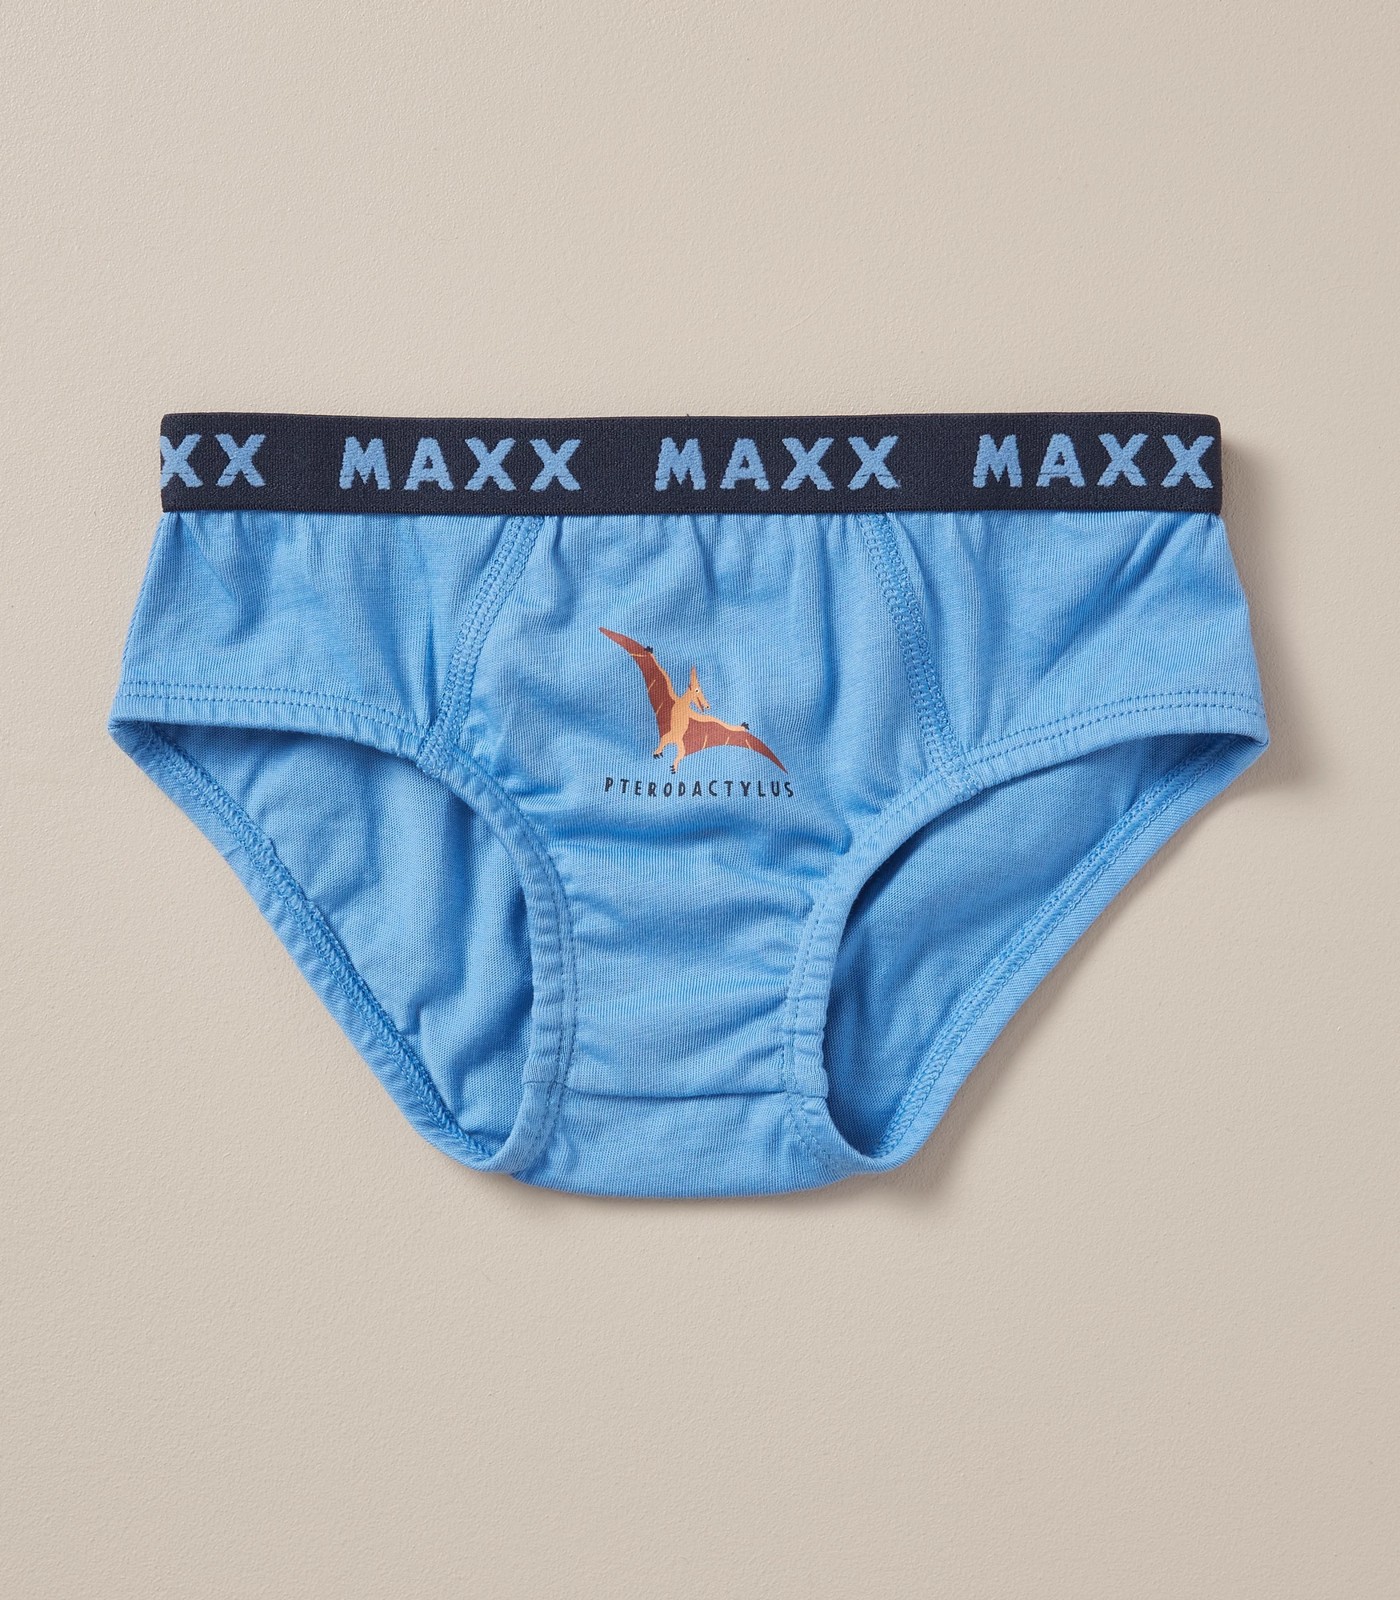 Maxx 5 Pack Hipster Briefs; Style: 155834